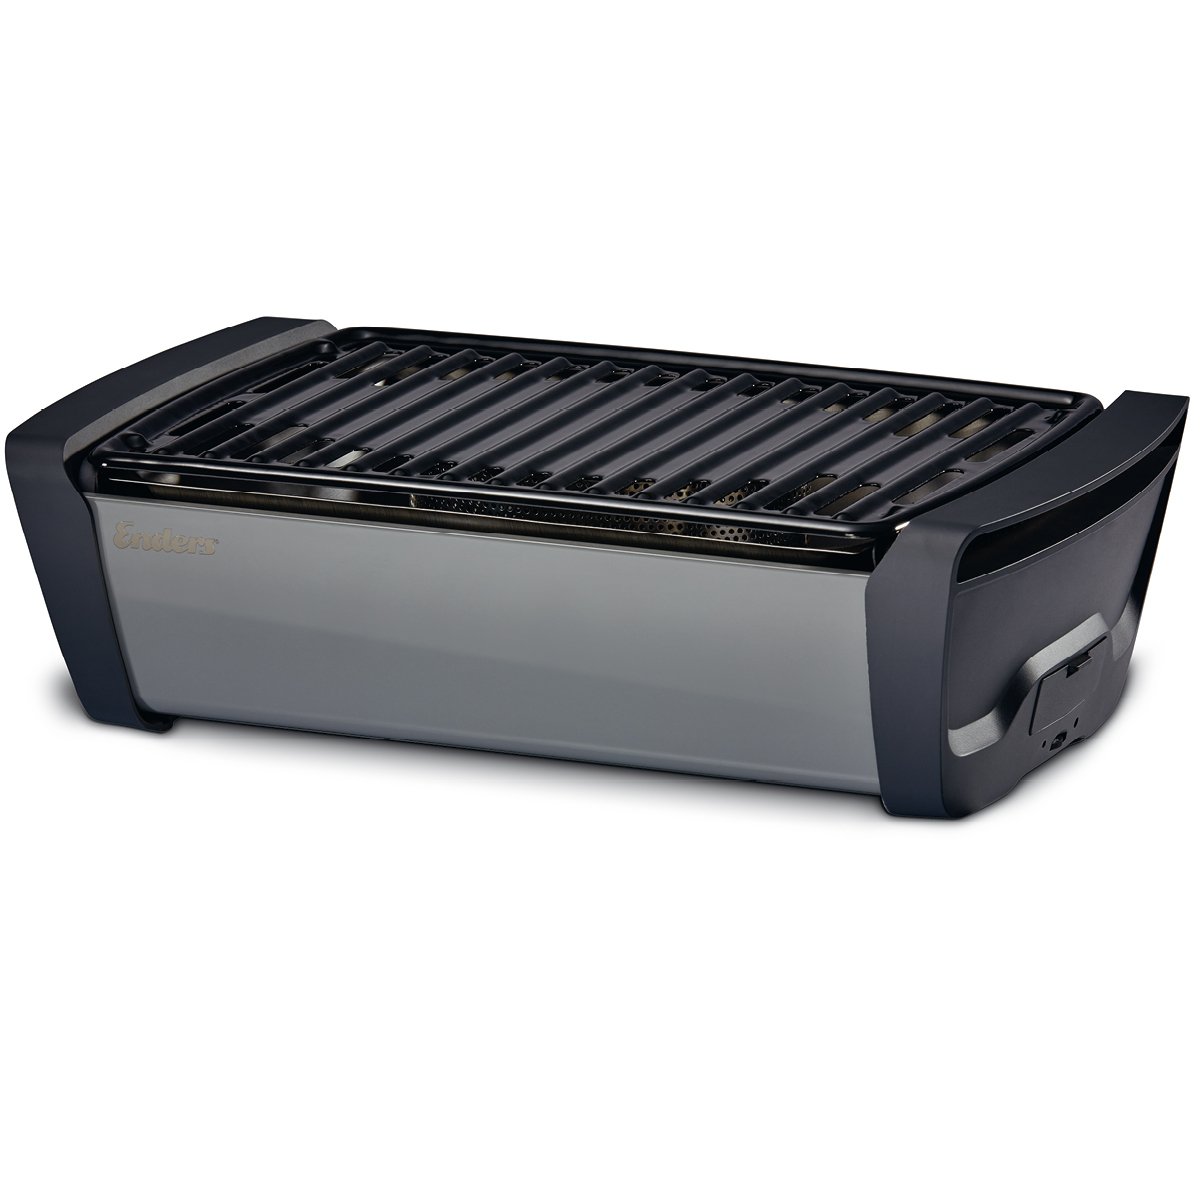 Enders Aurora raucharmer Tischgrill, mobiler Holzkohle-Grill, kleiner Grill, Balkon-Grill, Picknick-Grill, Camping-Grill, Grill mit Belüftung, grey #1364, 26x47x13,5 cm